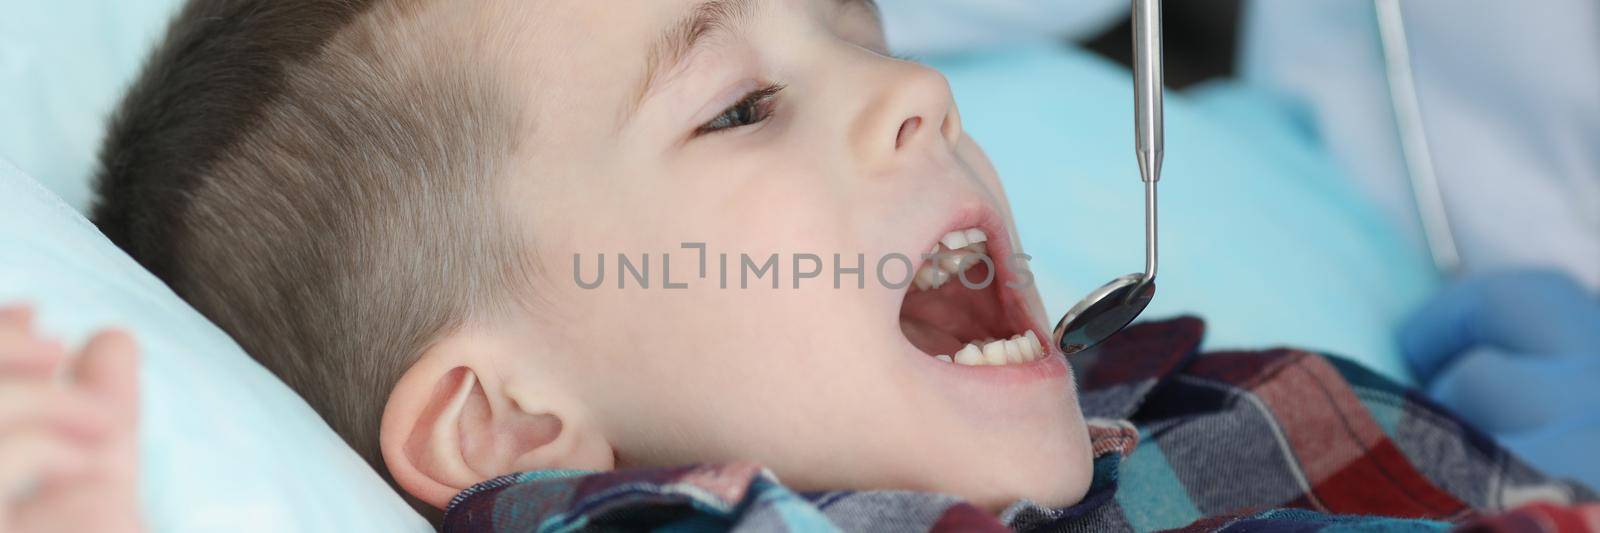 Pediatrician check kids health condition using special tool for mouth by kuprevich